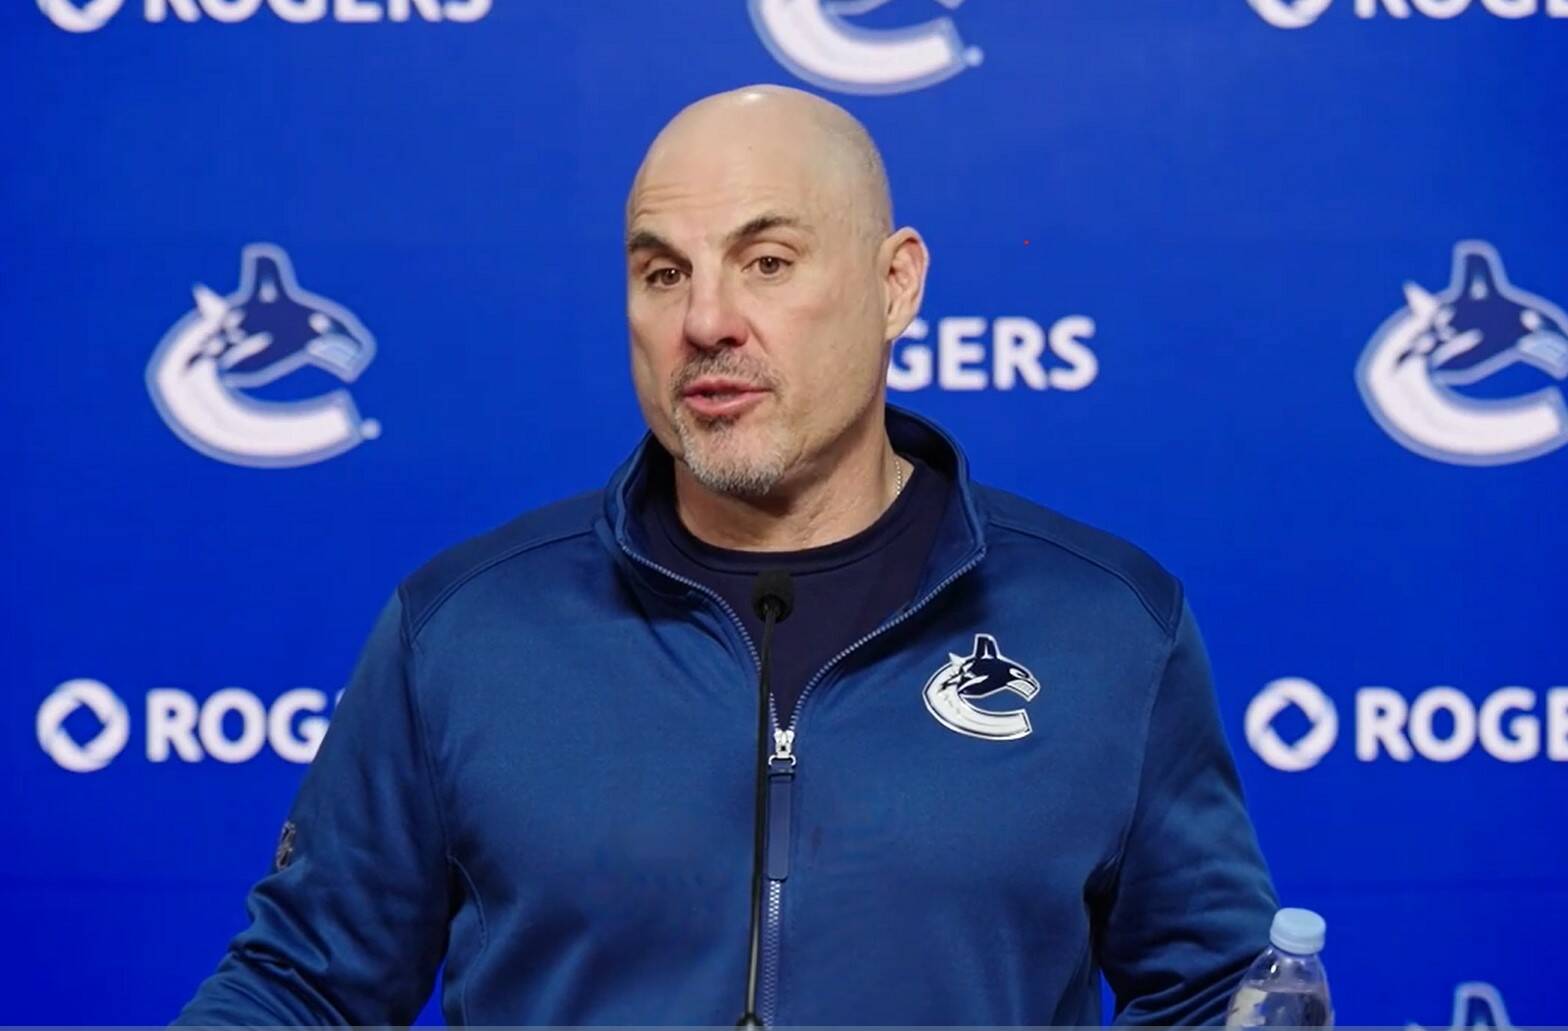 “I wish we were a little bit better on the boards (and) be a better wall team. We want to make plays. We want to scoot and play fast but I think if everyone can get better by five per cent…we’ve got some guys that will never be great wall guys – let’s face it – and that’s okay. But can they play five or ten per cent better on the wall or win the battle? That’s the way we are approaching it here. I think if everyone can get better, that’s how we can get better as a team.” - Canucks head coach Rick Tocchet. Vancouver Canucks photo